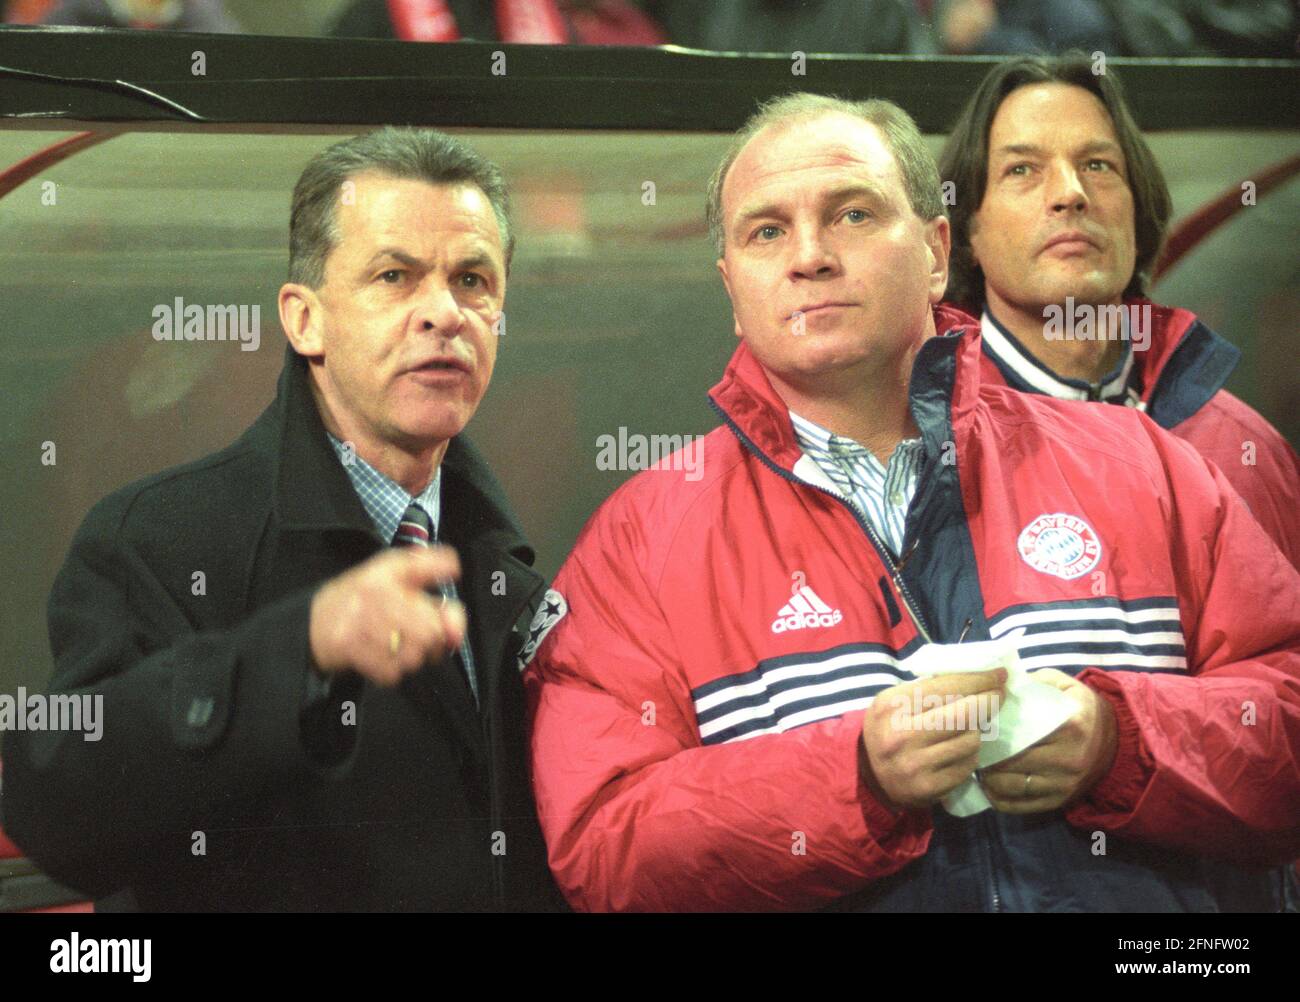 Ottmar Hitzfeld (left) as coach of FC Bayern Munich and manager Uli Hoeneß. Rec. 17.03.1999. In the background: team doctor Dr. Müller-Wohlfahrt. DFL REGULATIONS PROHIBIT ANY USE OF PHOTOGRAPHS AS IMAGE SEQUENCES AND/OR QUASI-VIDEO [automated translation] Stock Photo